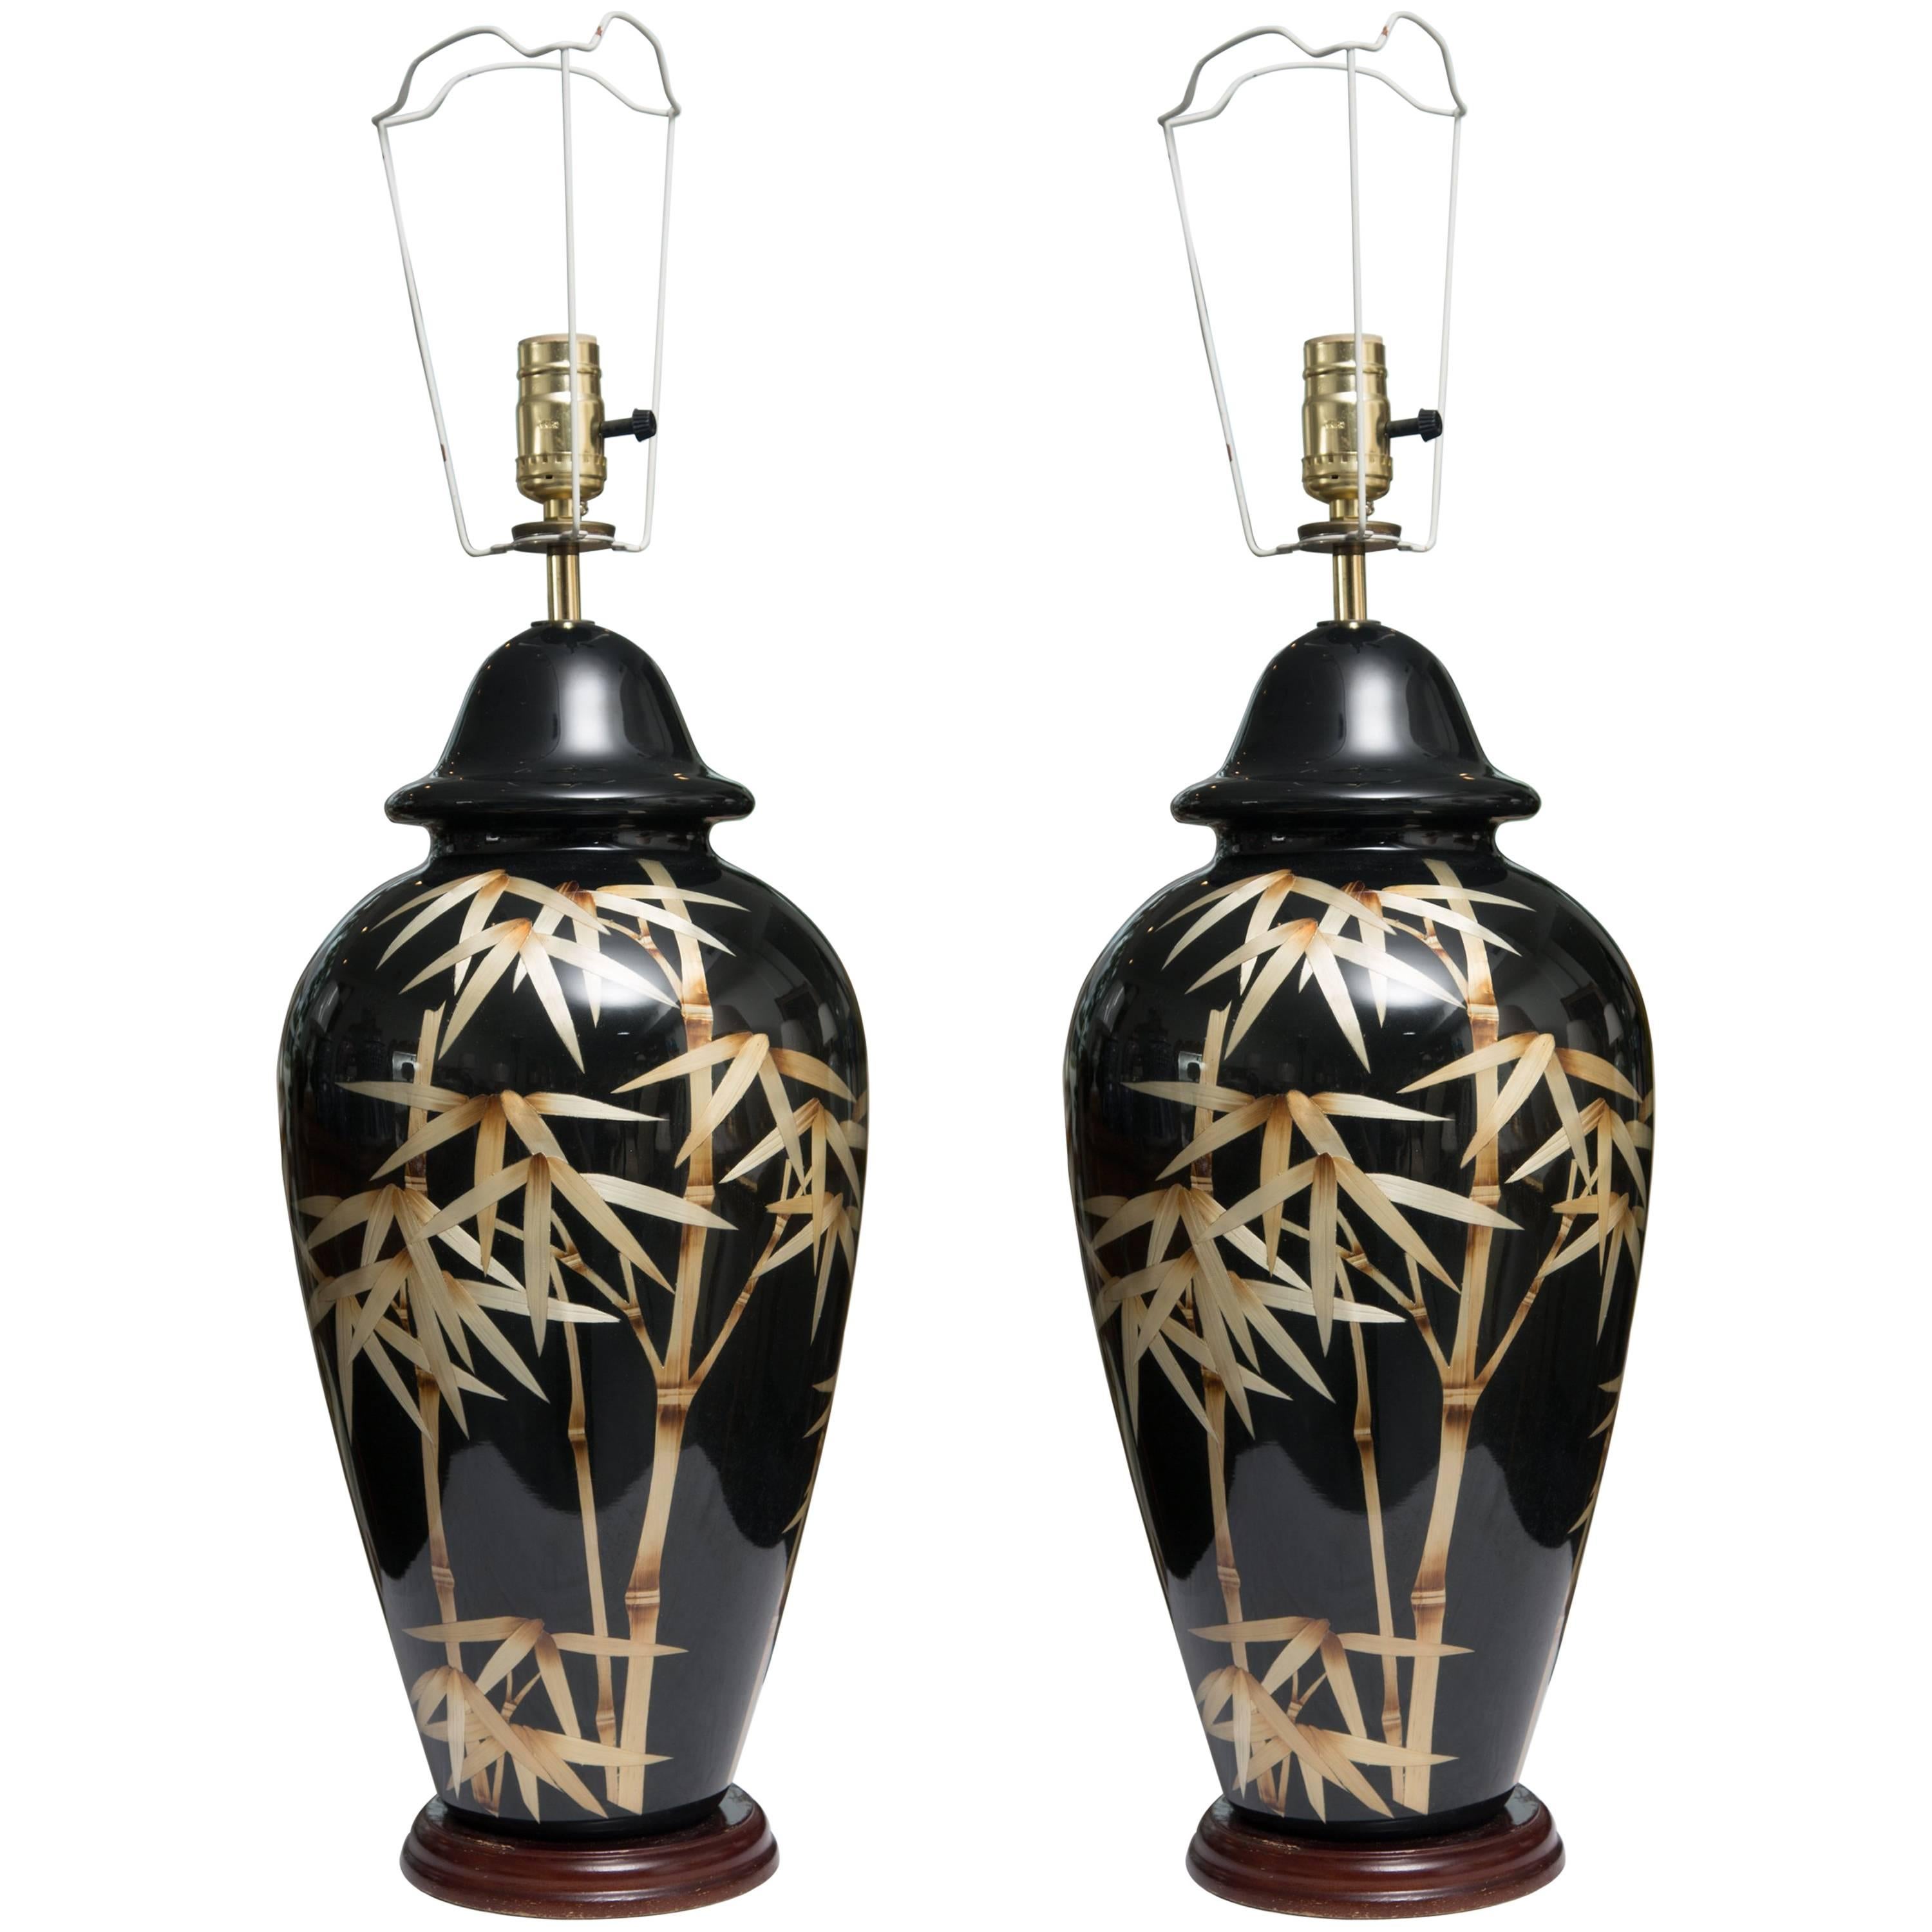 Pair of Vintage Black Glass Lamps with Bamboo Design